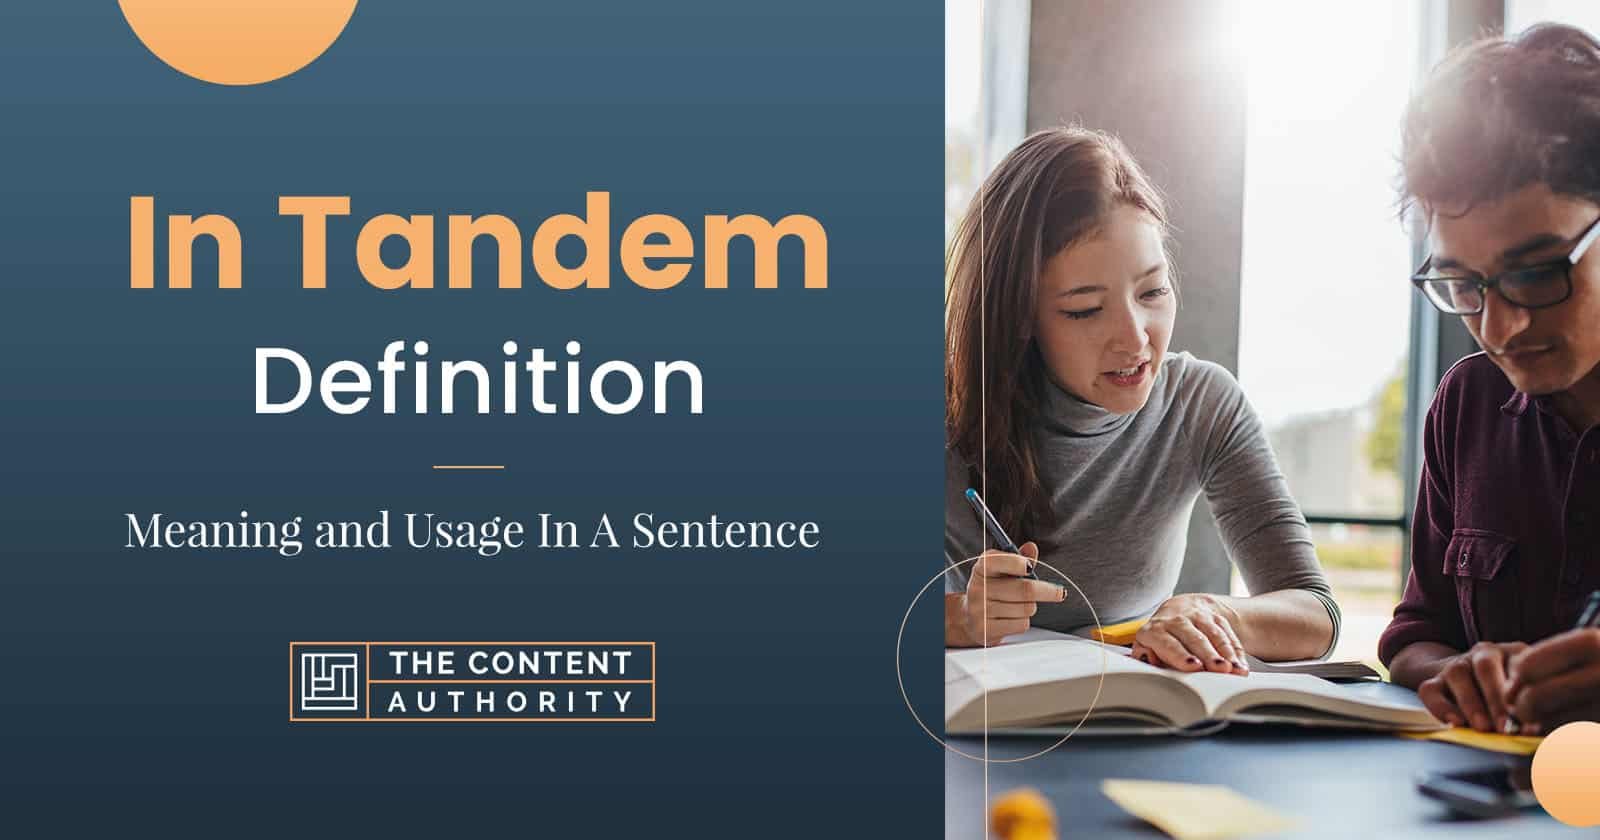 In Tandem Definition – Meaning and Usage In A Sentence